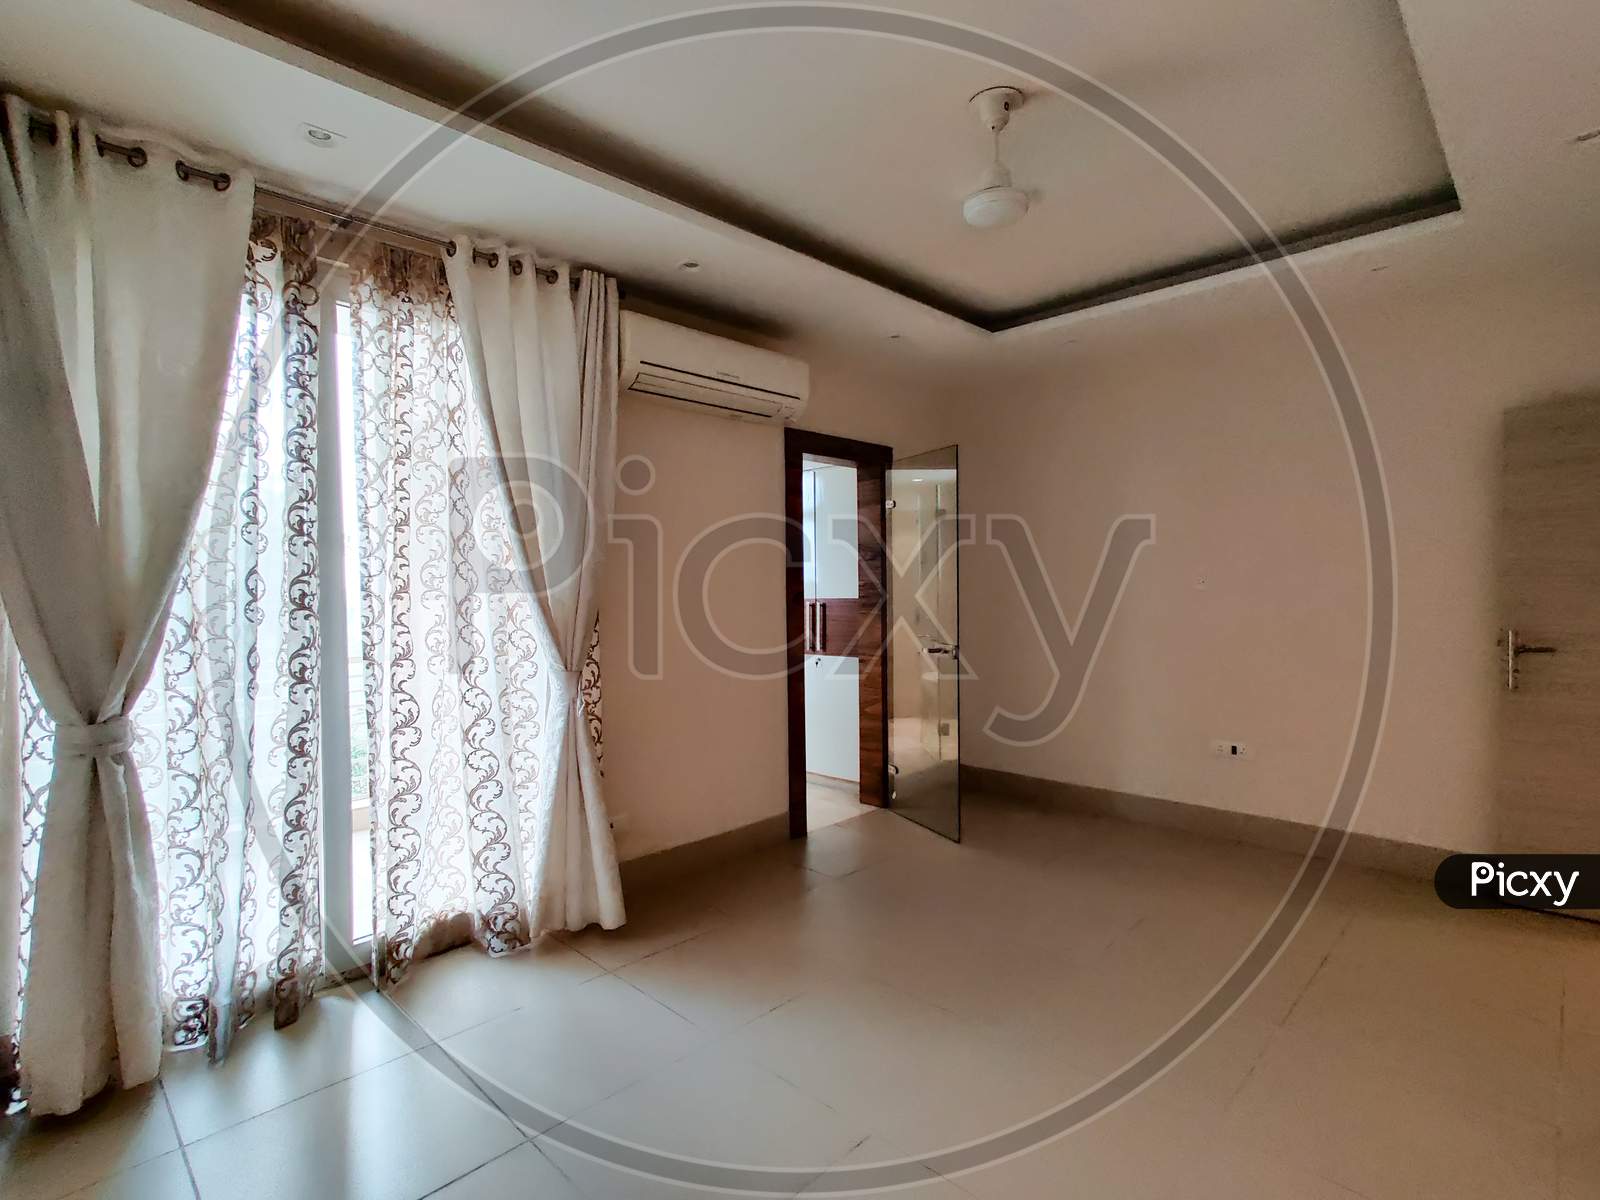 Wide Angle Shot Of A Ready To Move In Apartment With Lace Curtains And Good Natural Light